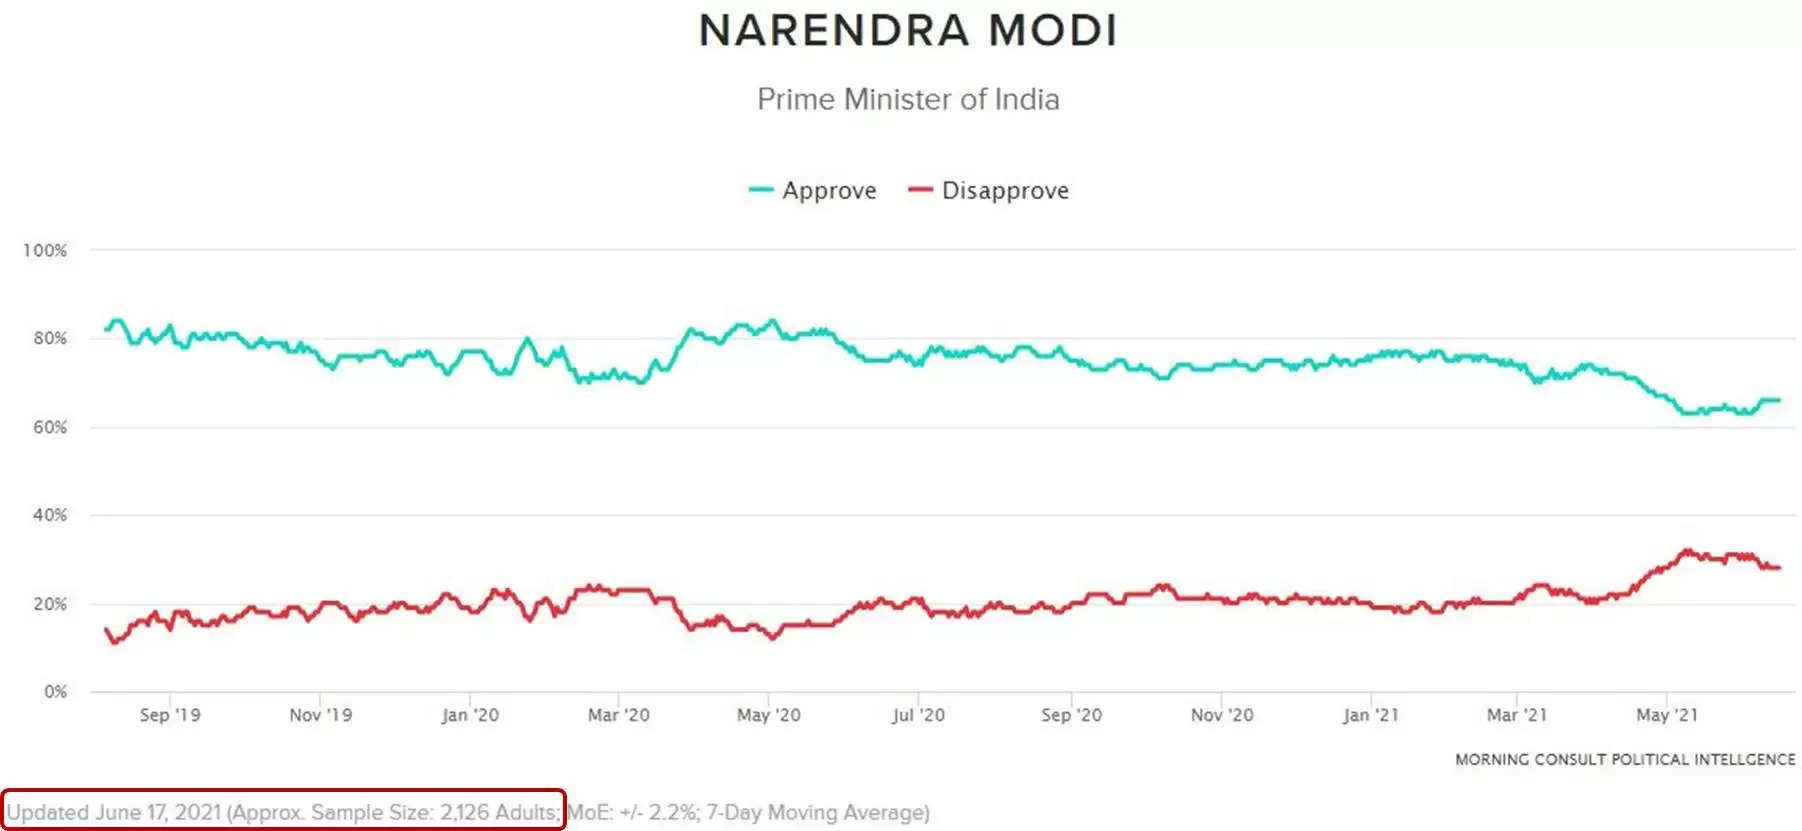 Narendra Modi highest approval rating in the world higher than Merkel and Trudeau Lowest sample size